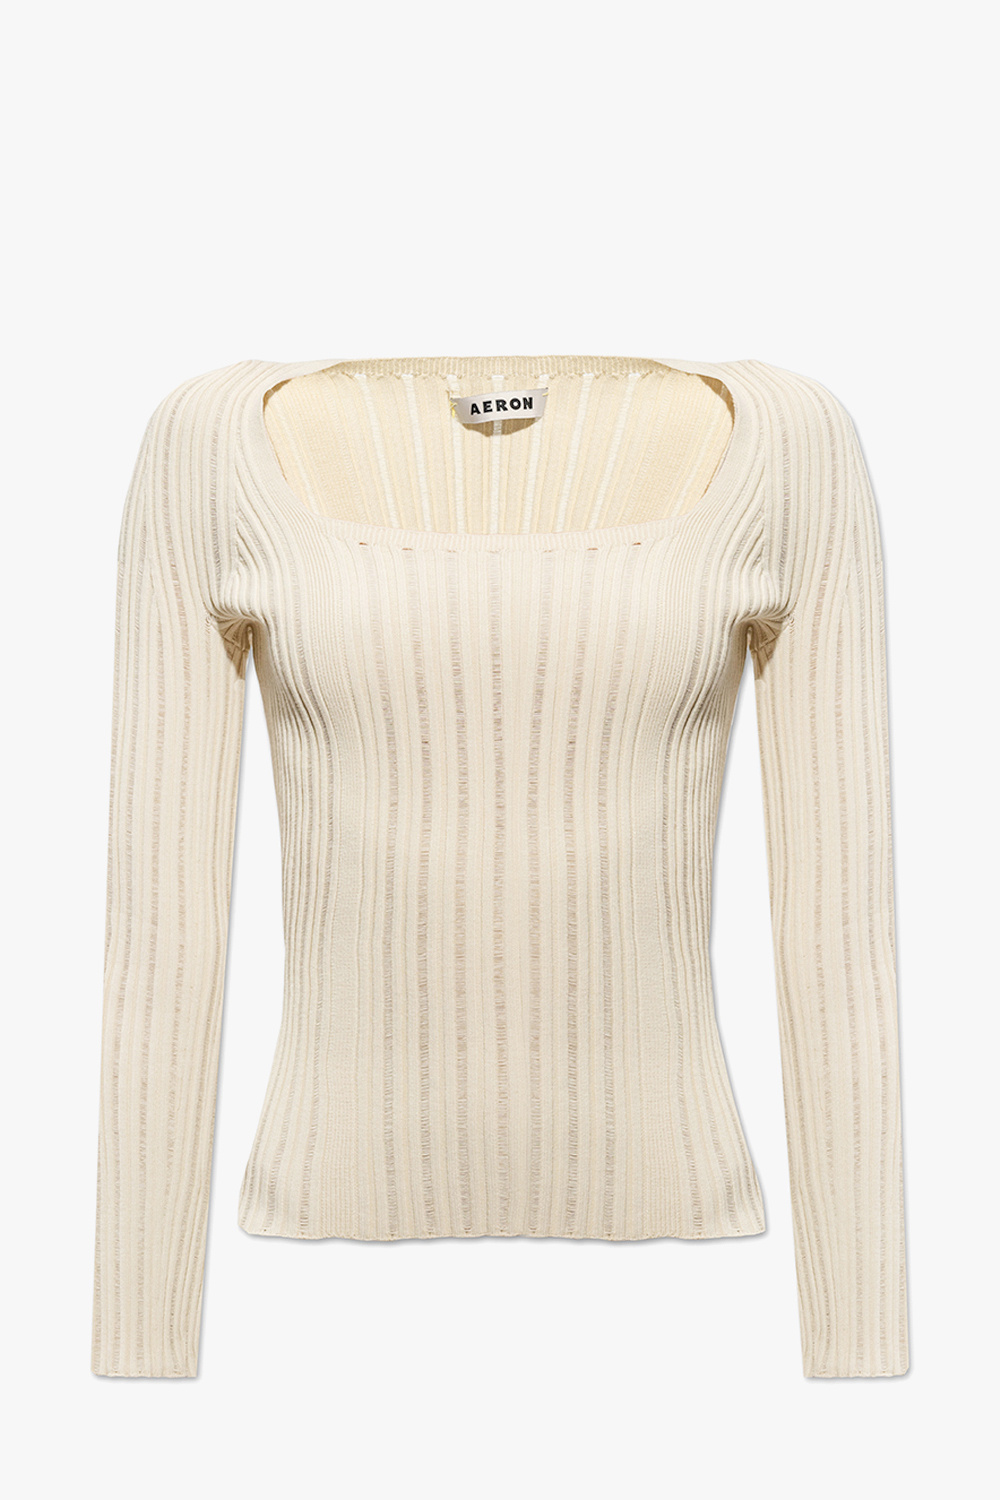 Aeron ‘Finesse’ ribbed top